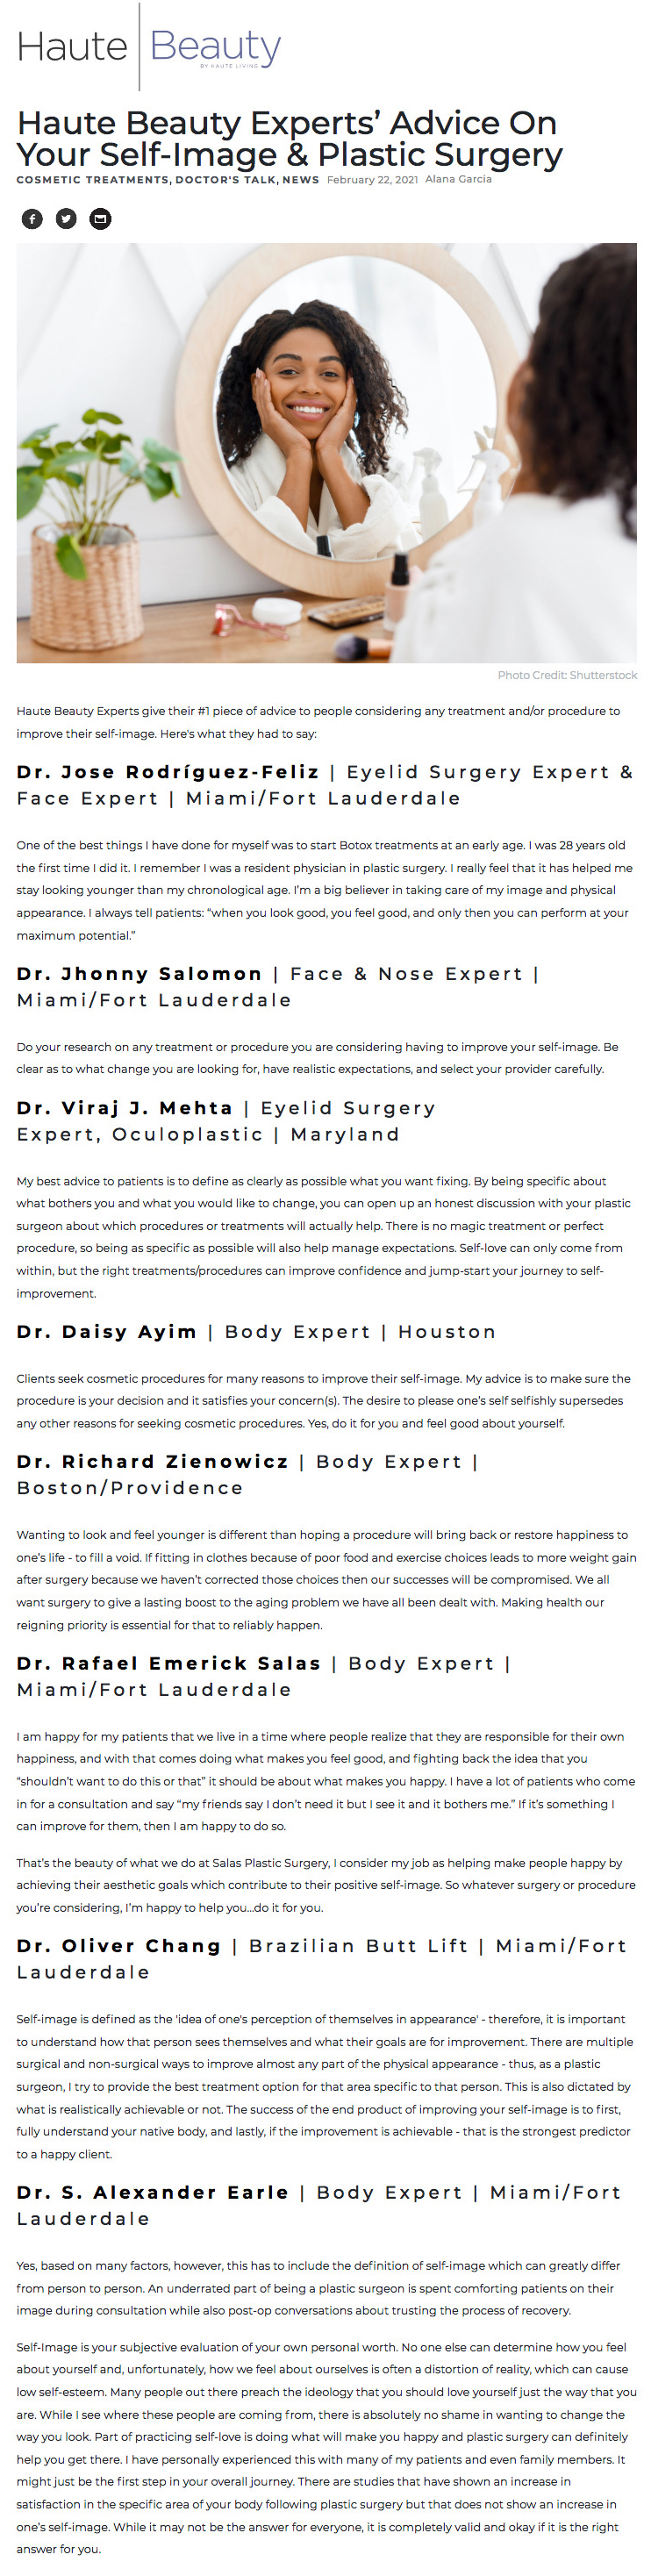 Haute Beauty Experts’ Advice On Your Self-Image & Plastic Surgery